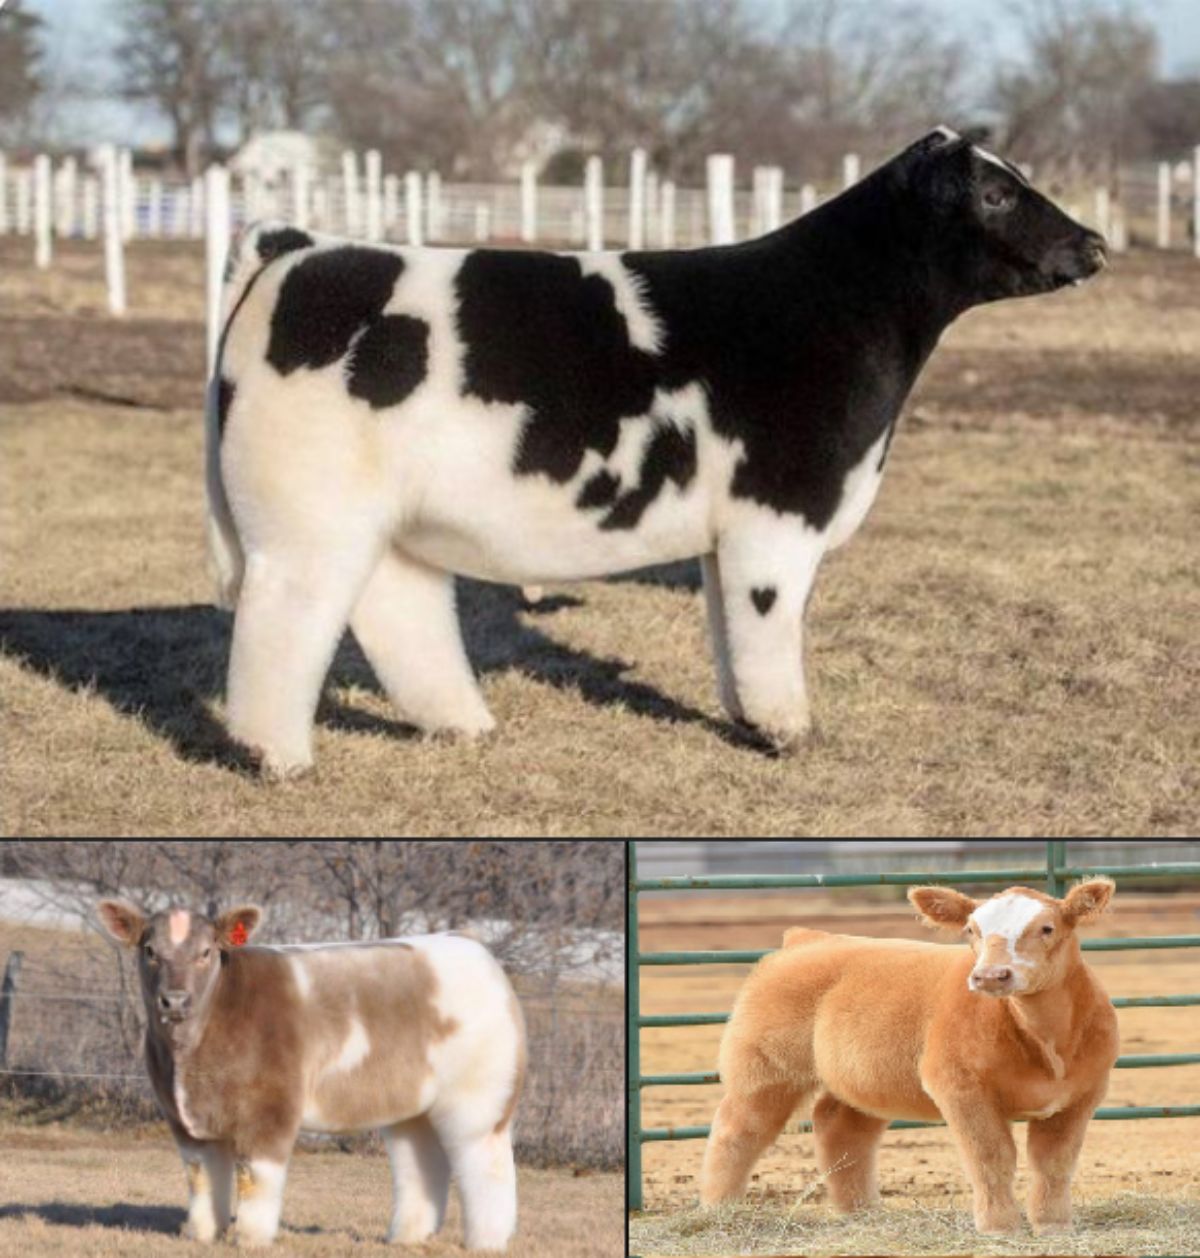 3 photos of a black and white cow, 2 brown and white cows